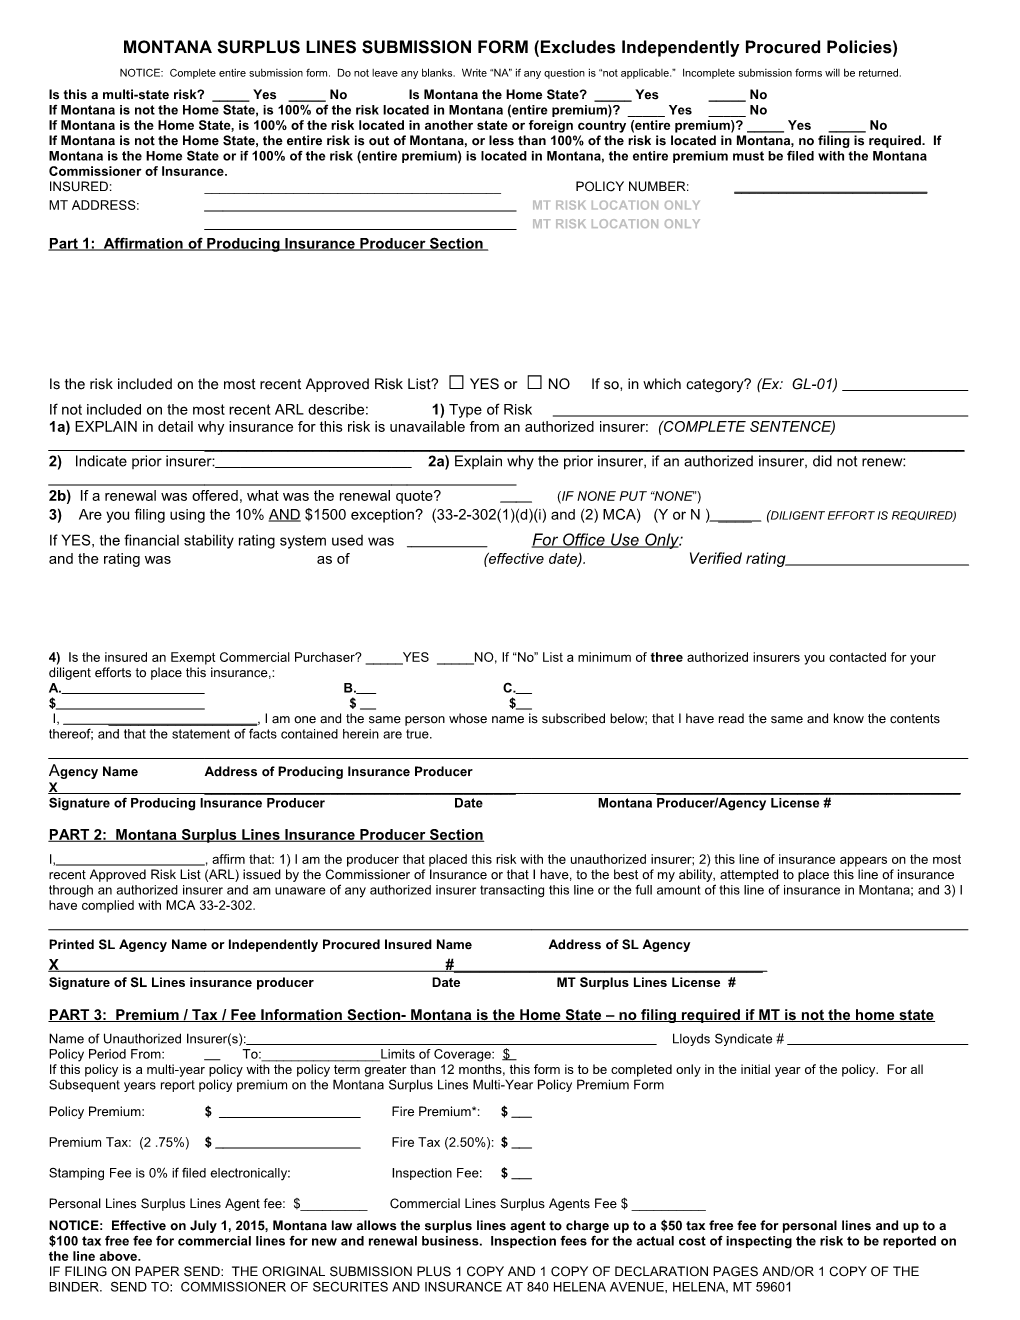 MONTANA SURPLUS LINES SUBMISSION FORM (Excludes Independently Procured Policies)